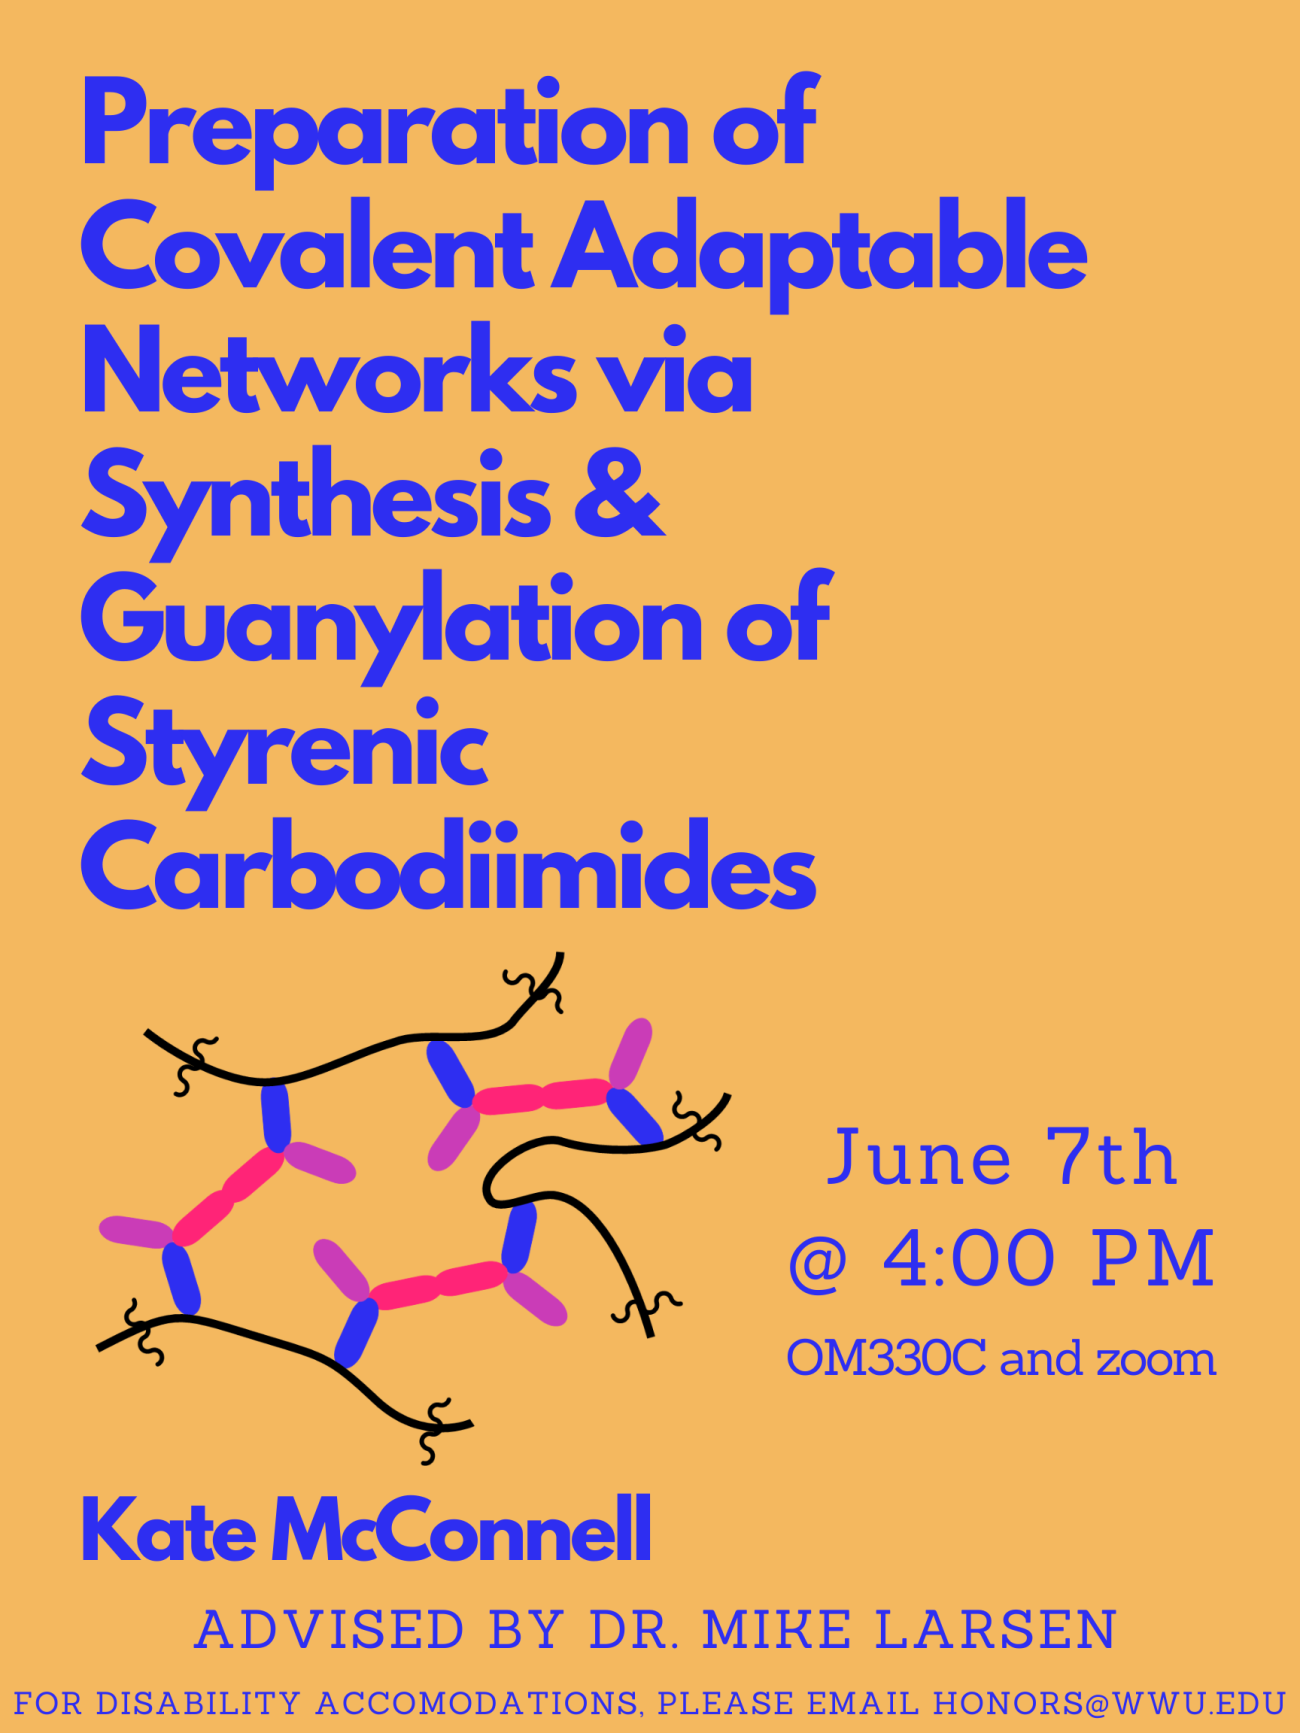 Orange background with cartoon representation of guanidine-based covalent adaptable network. Text reads “Preparation of Covalent Adaptable Networks via Synthesis & Guanylation of Styrenic Carbodiimides. Presented by Kate McConnell, advised by Dr. Mike Larsen. June 7th at 4:00 PM. OM330C and zoom. For disability accommodations please email honors@wwu.edu."